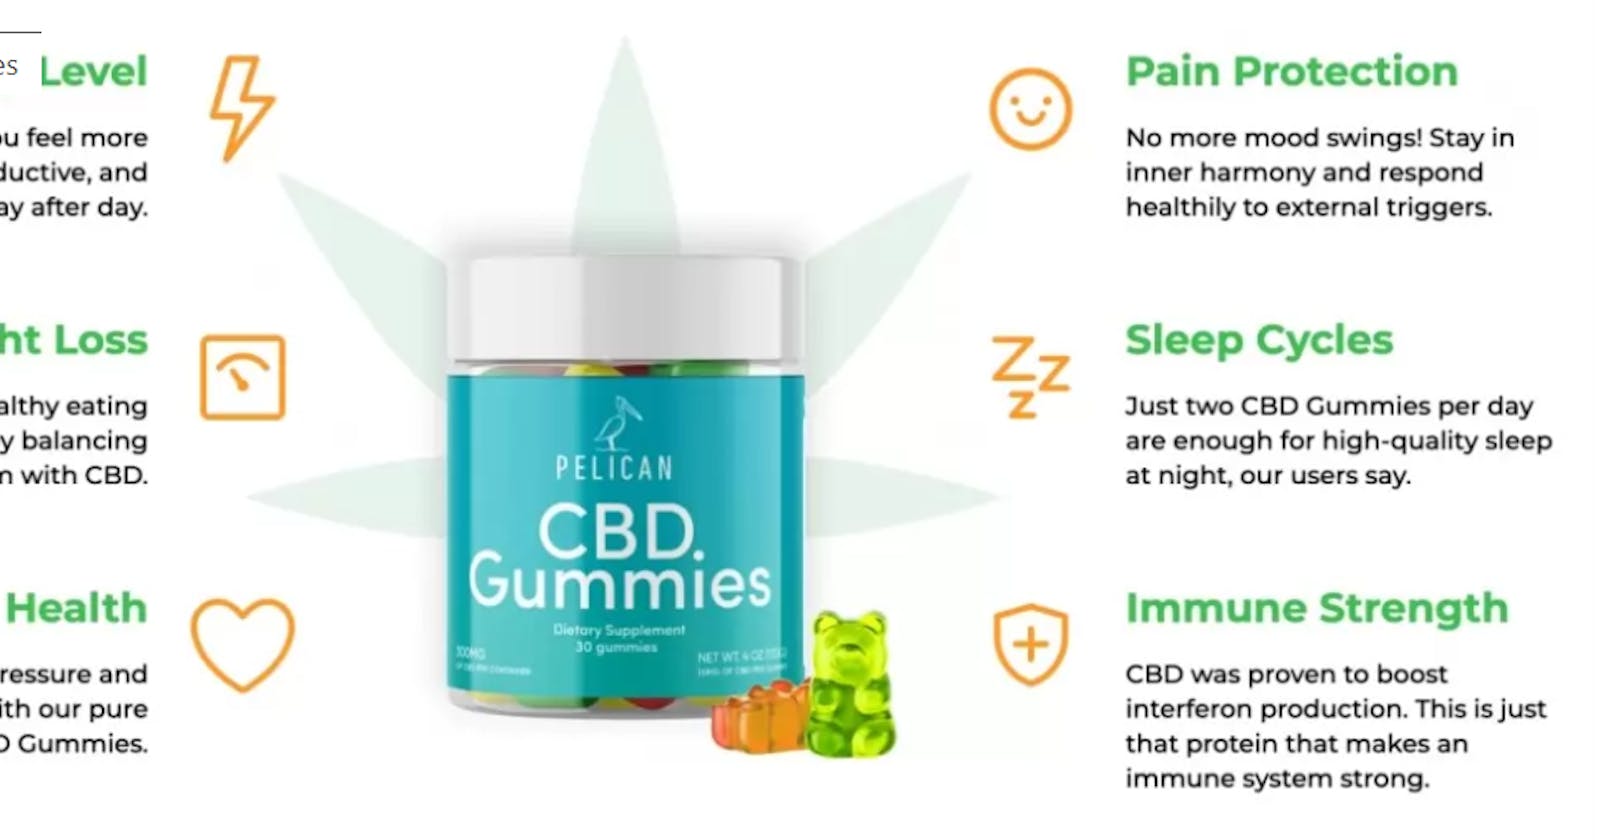 Pelican CBD Gummies 300mg Reviews,Near Me, Amazon, Cost, Price, Ingredients, Official Website?